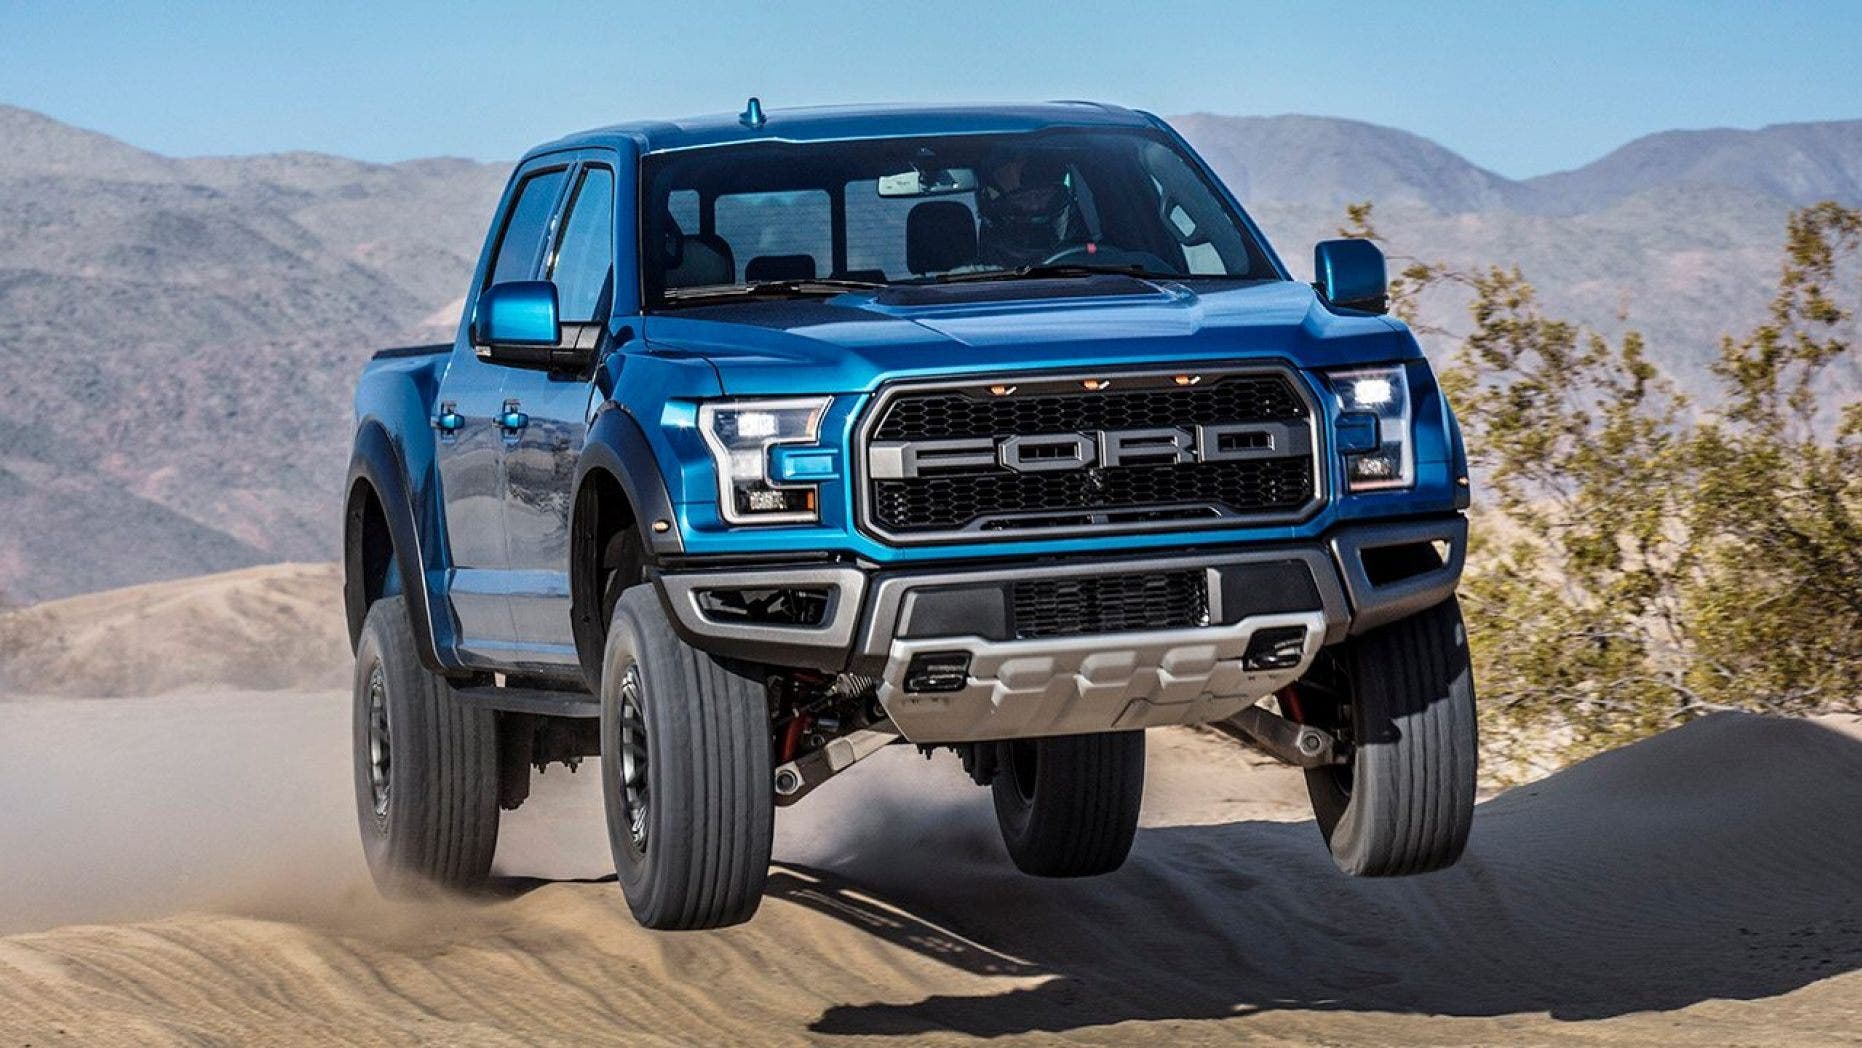 A 2,000 horsepower Ford F-150? Here's how to get one